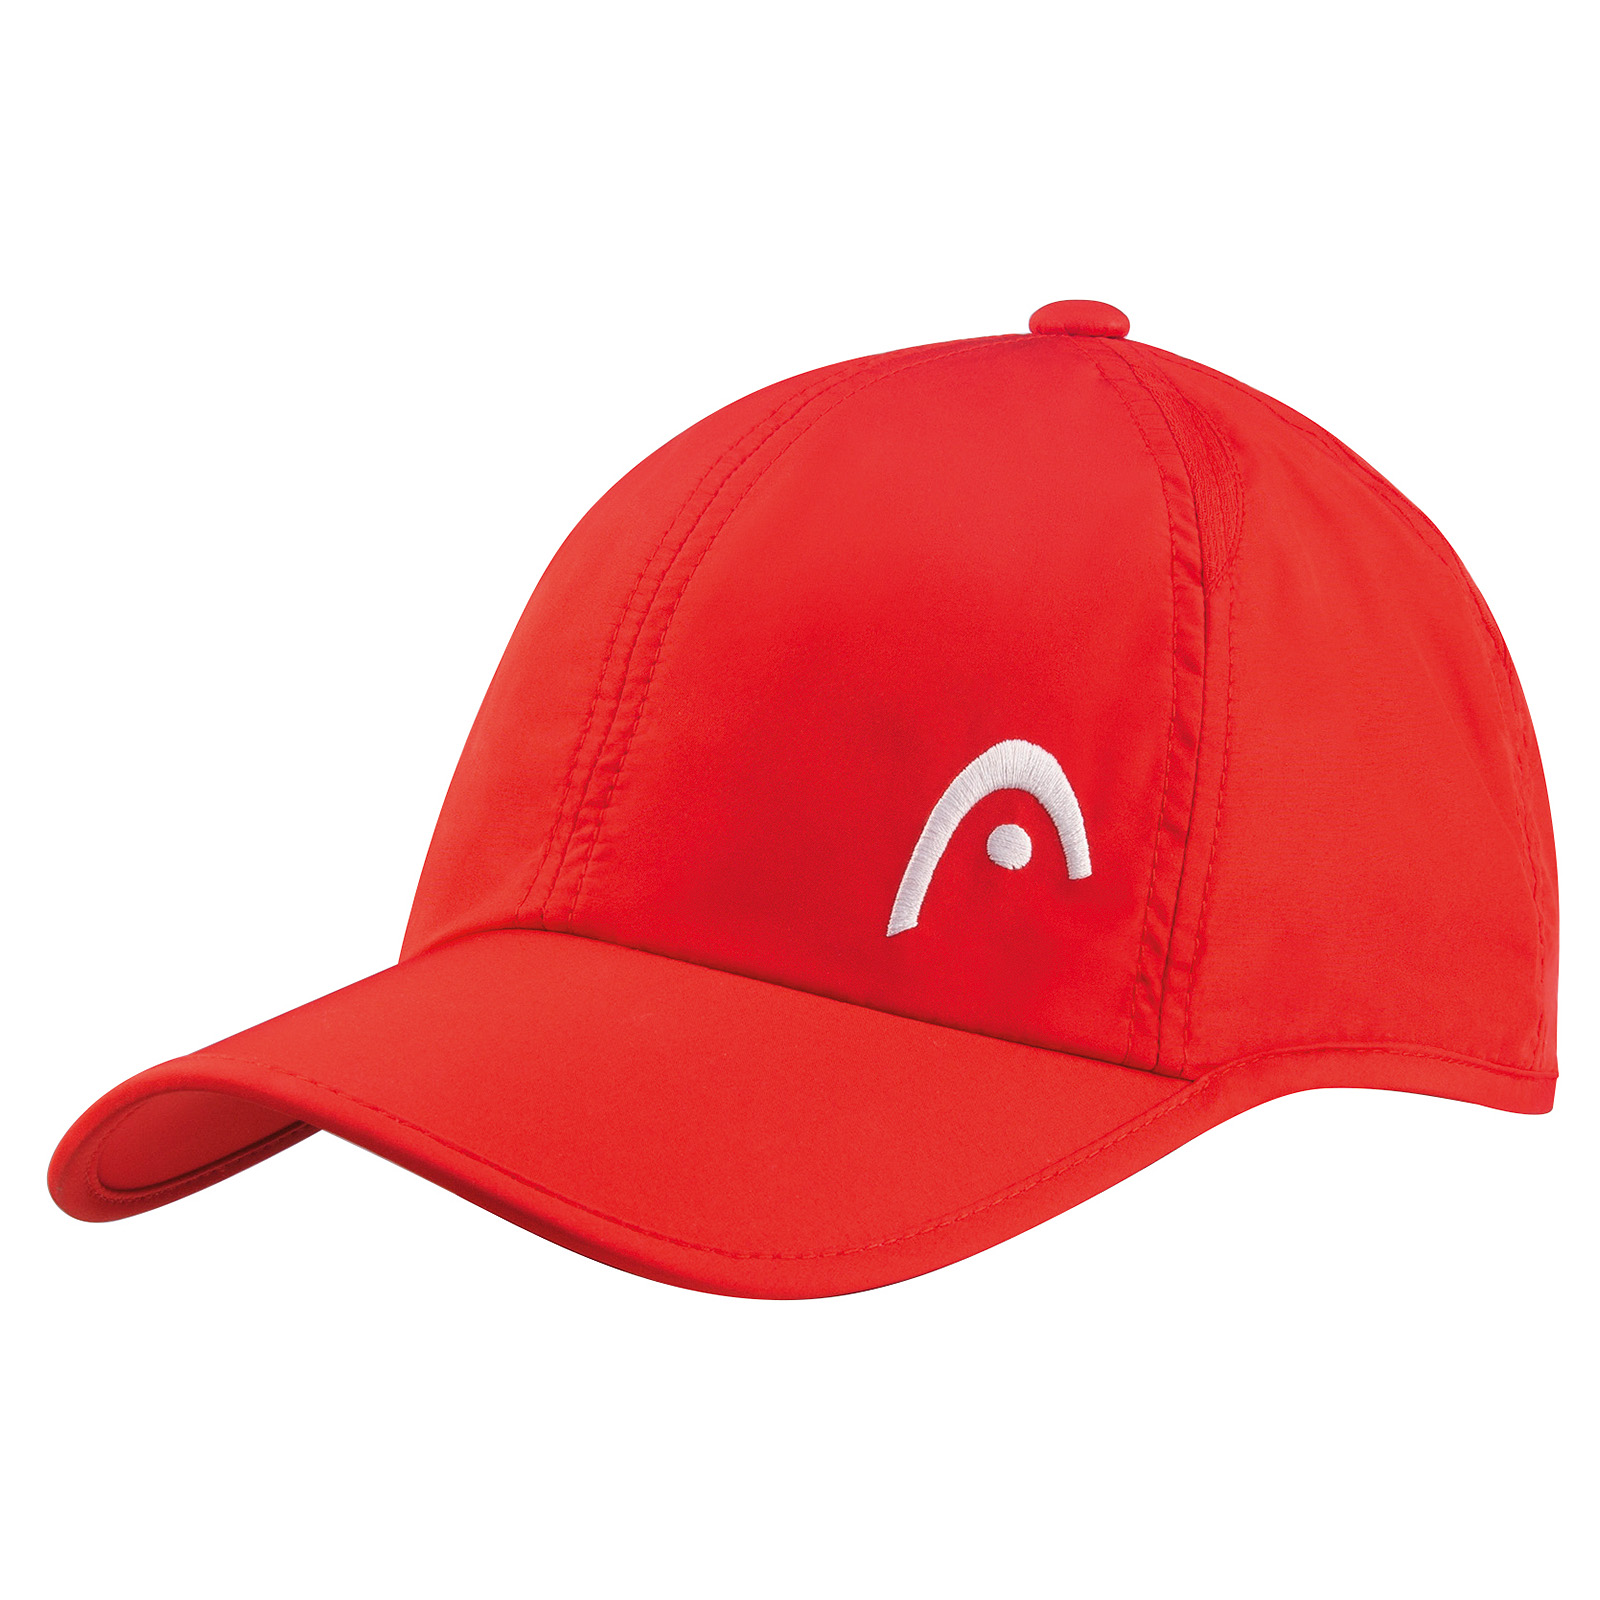 Head Pro Player Hat (Red)